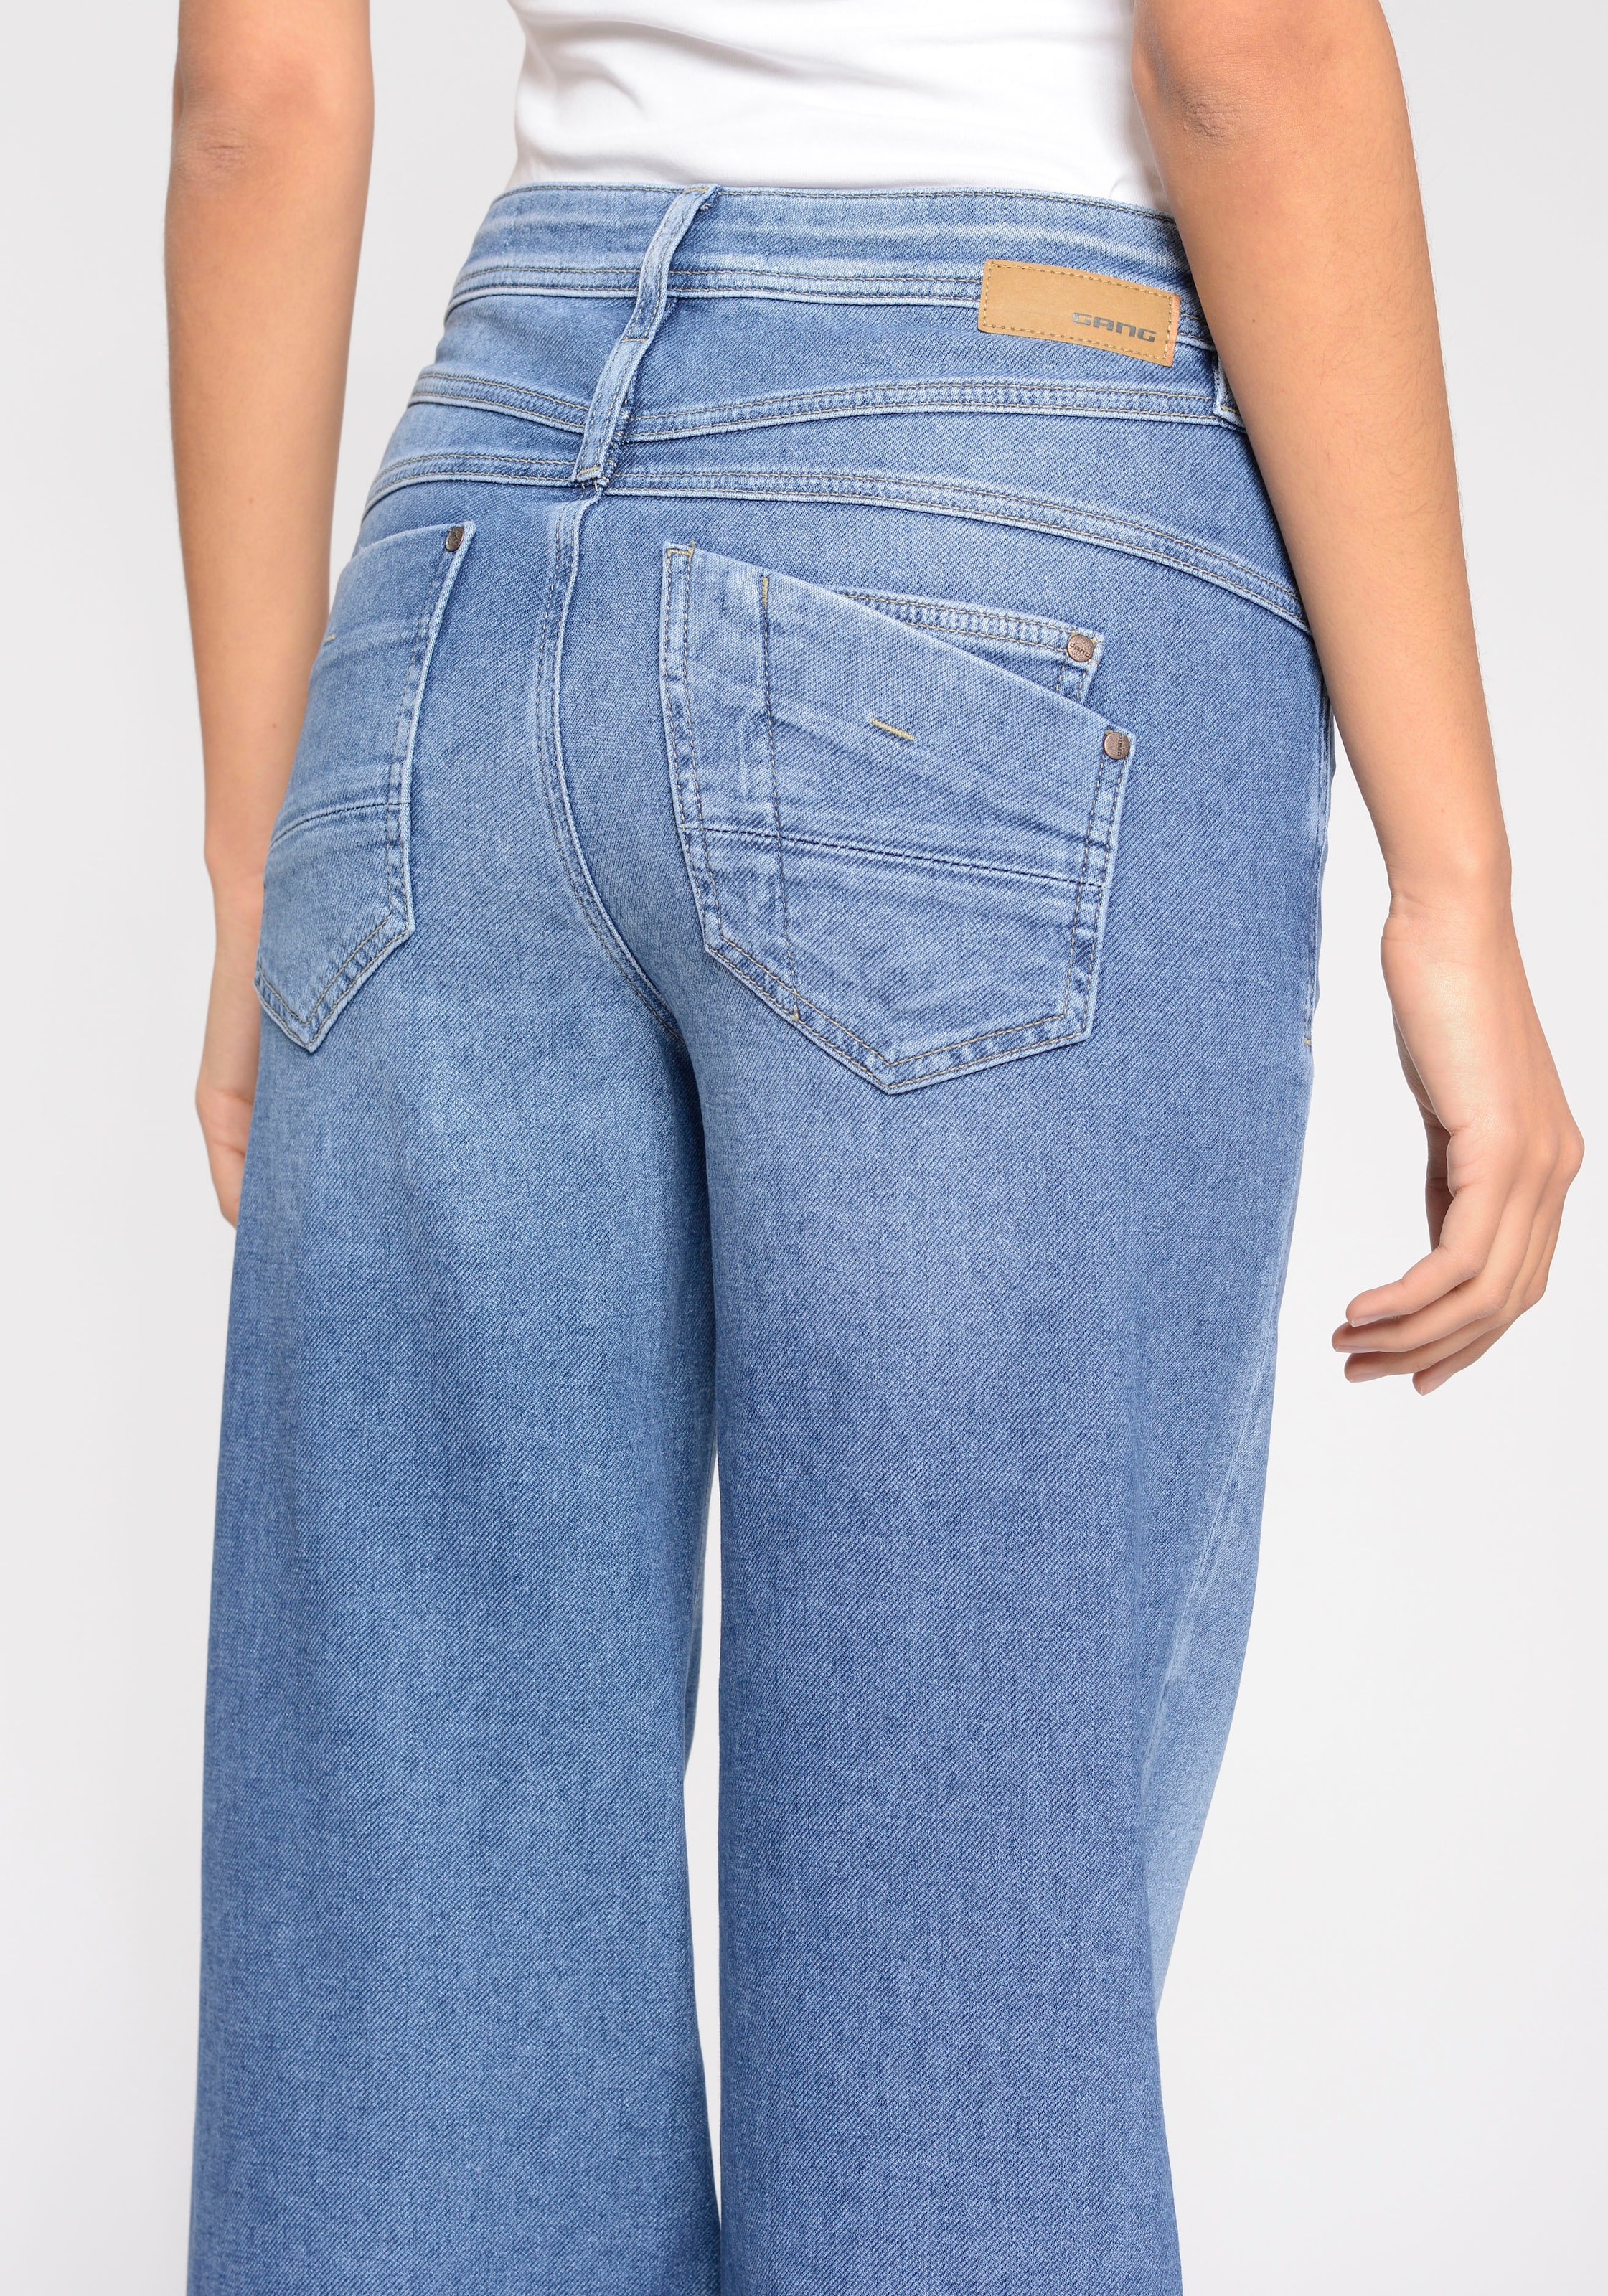 ♕ »94Amelie GANG Weite Jeans bei Wide«